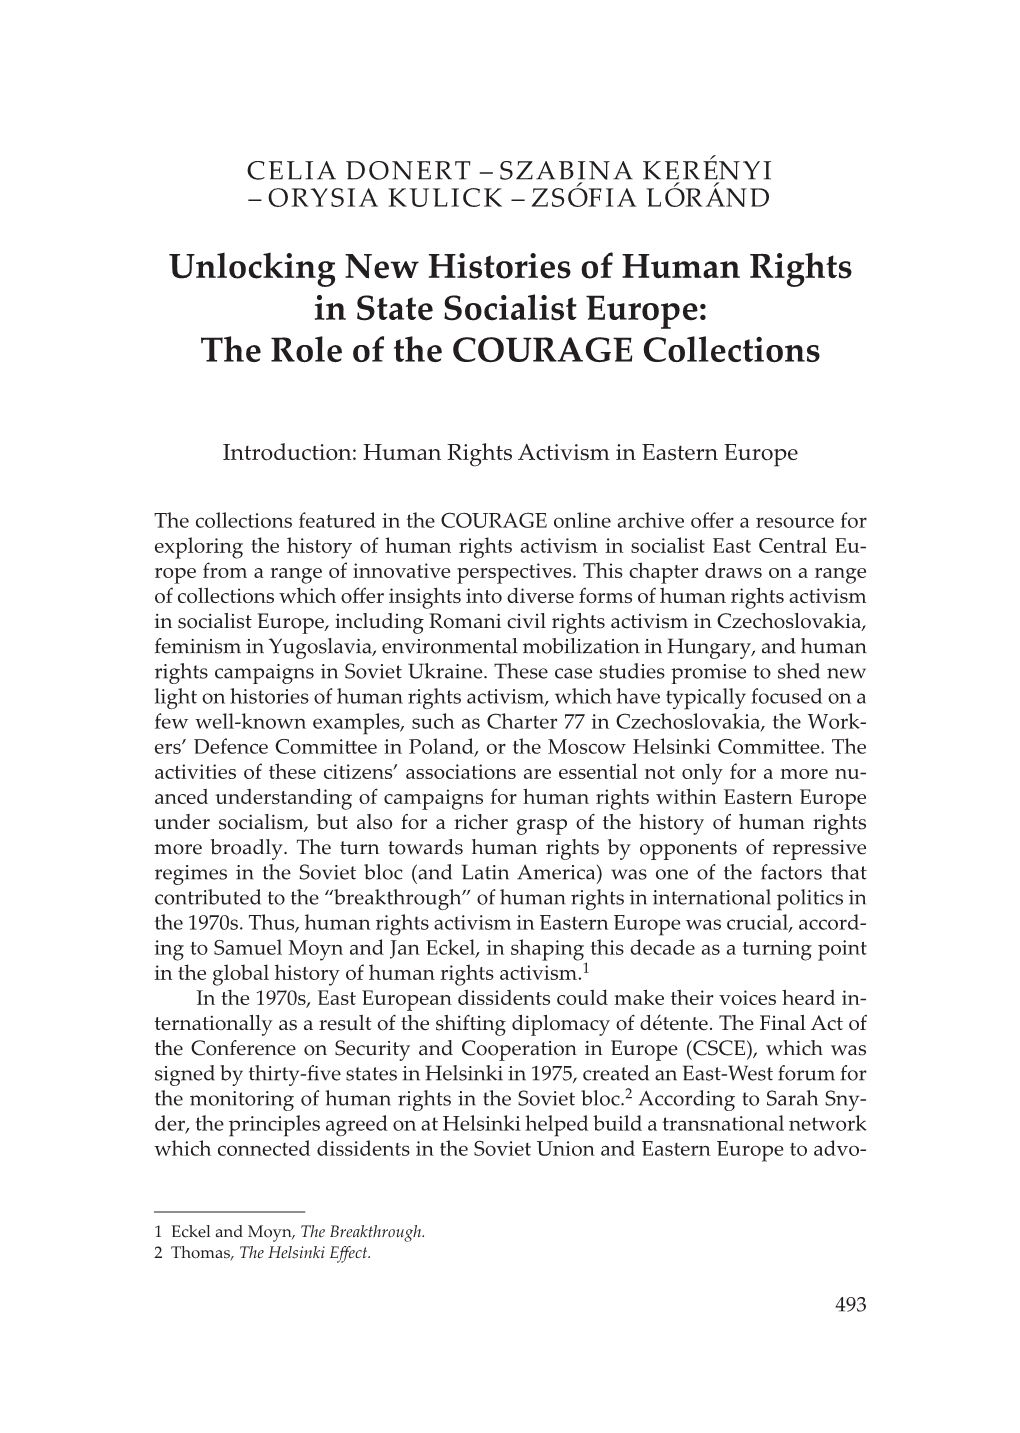 Unlocking New Histories of Human Rights in State Socialist Europe: the Role of the COURAGE Collections